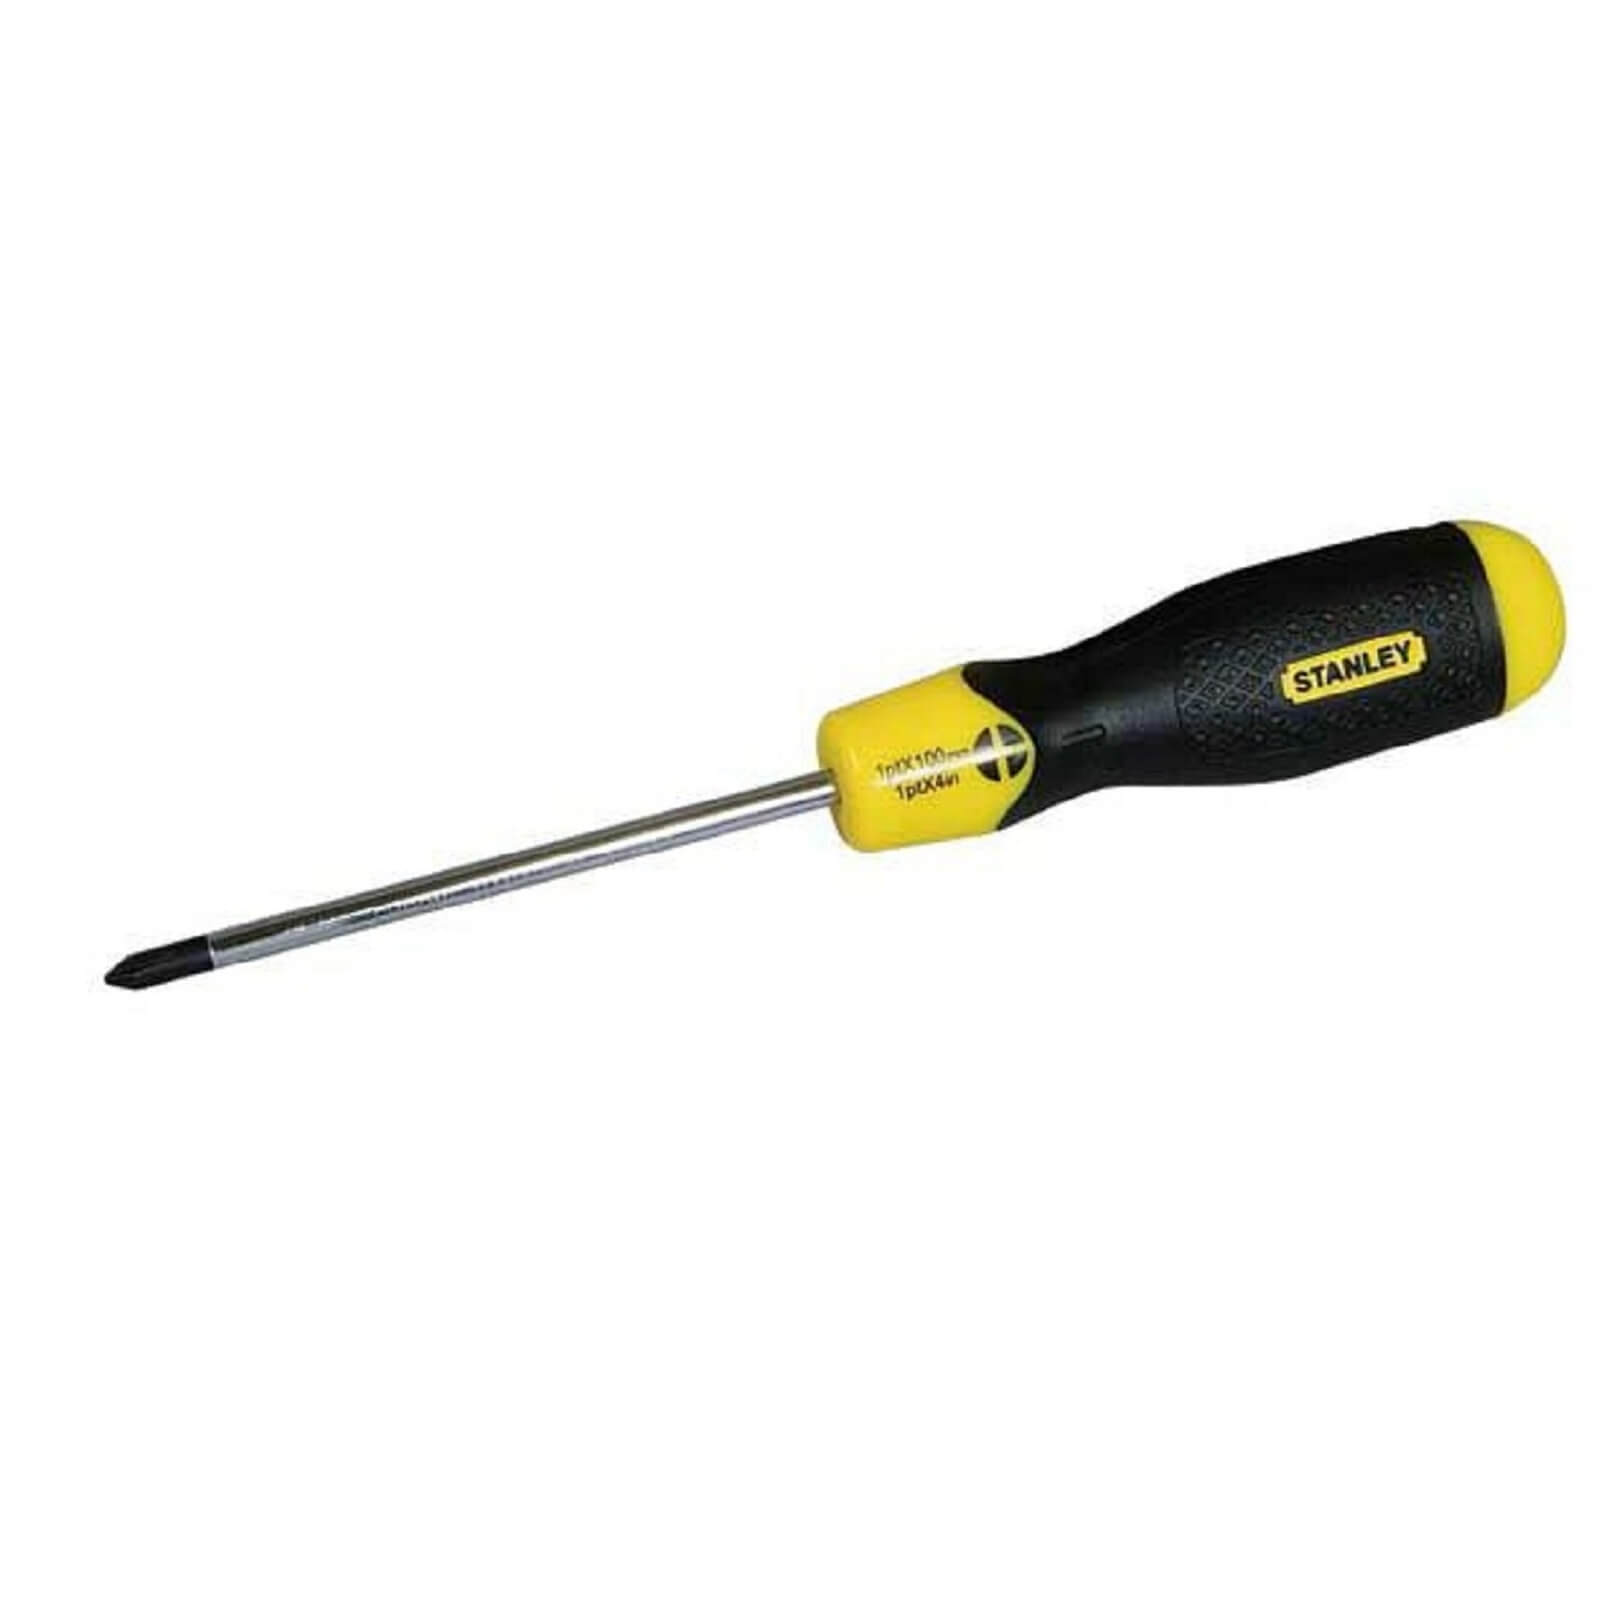 Photo of Stanley Cushion Grip Philips Screwdriver - No. 2x100mm